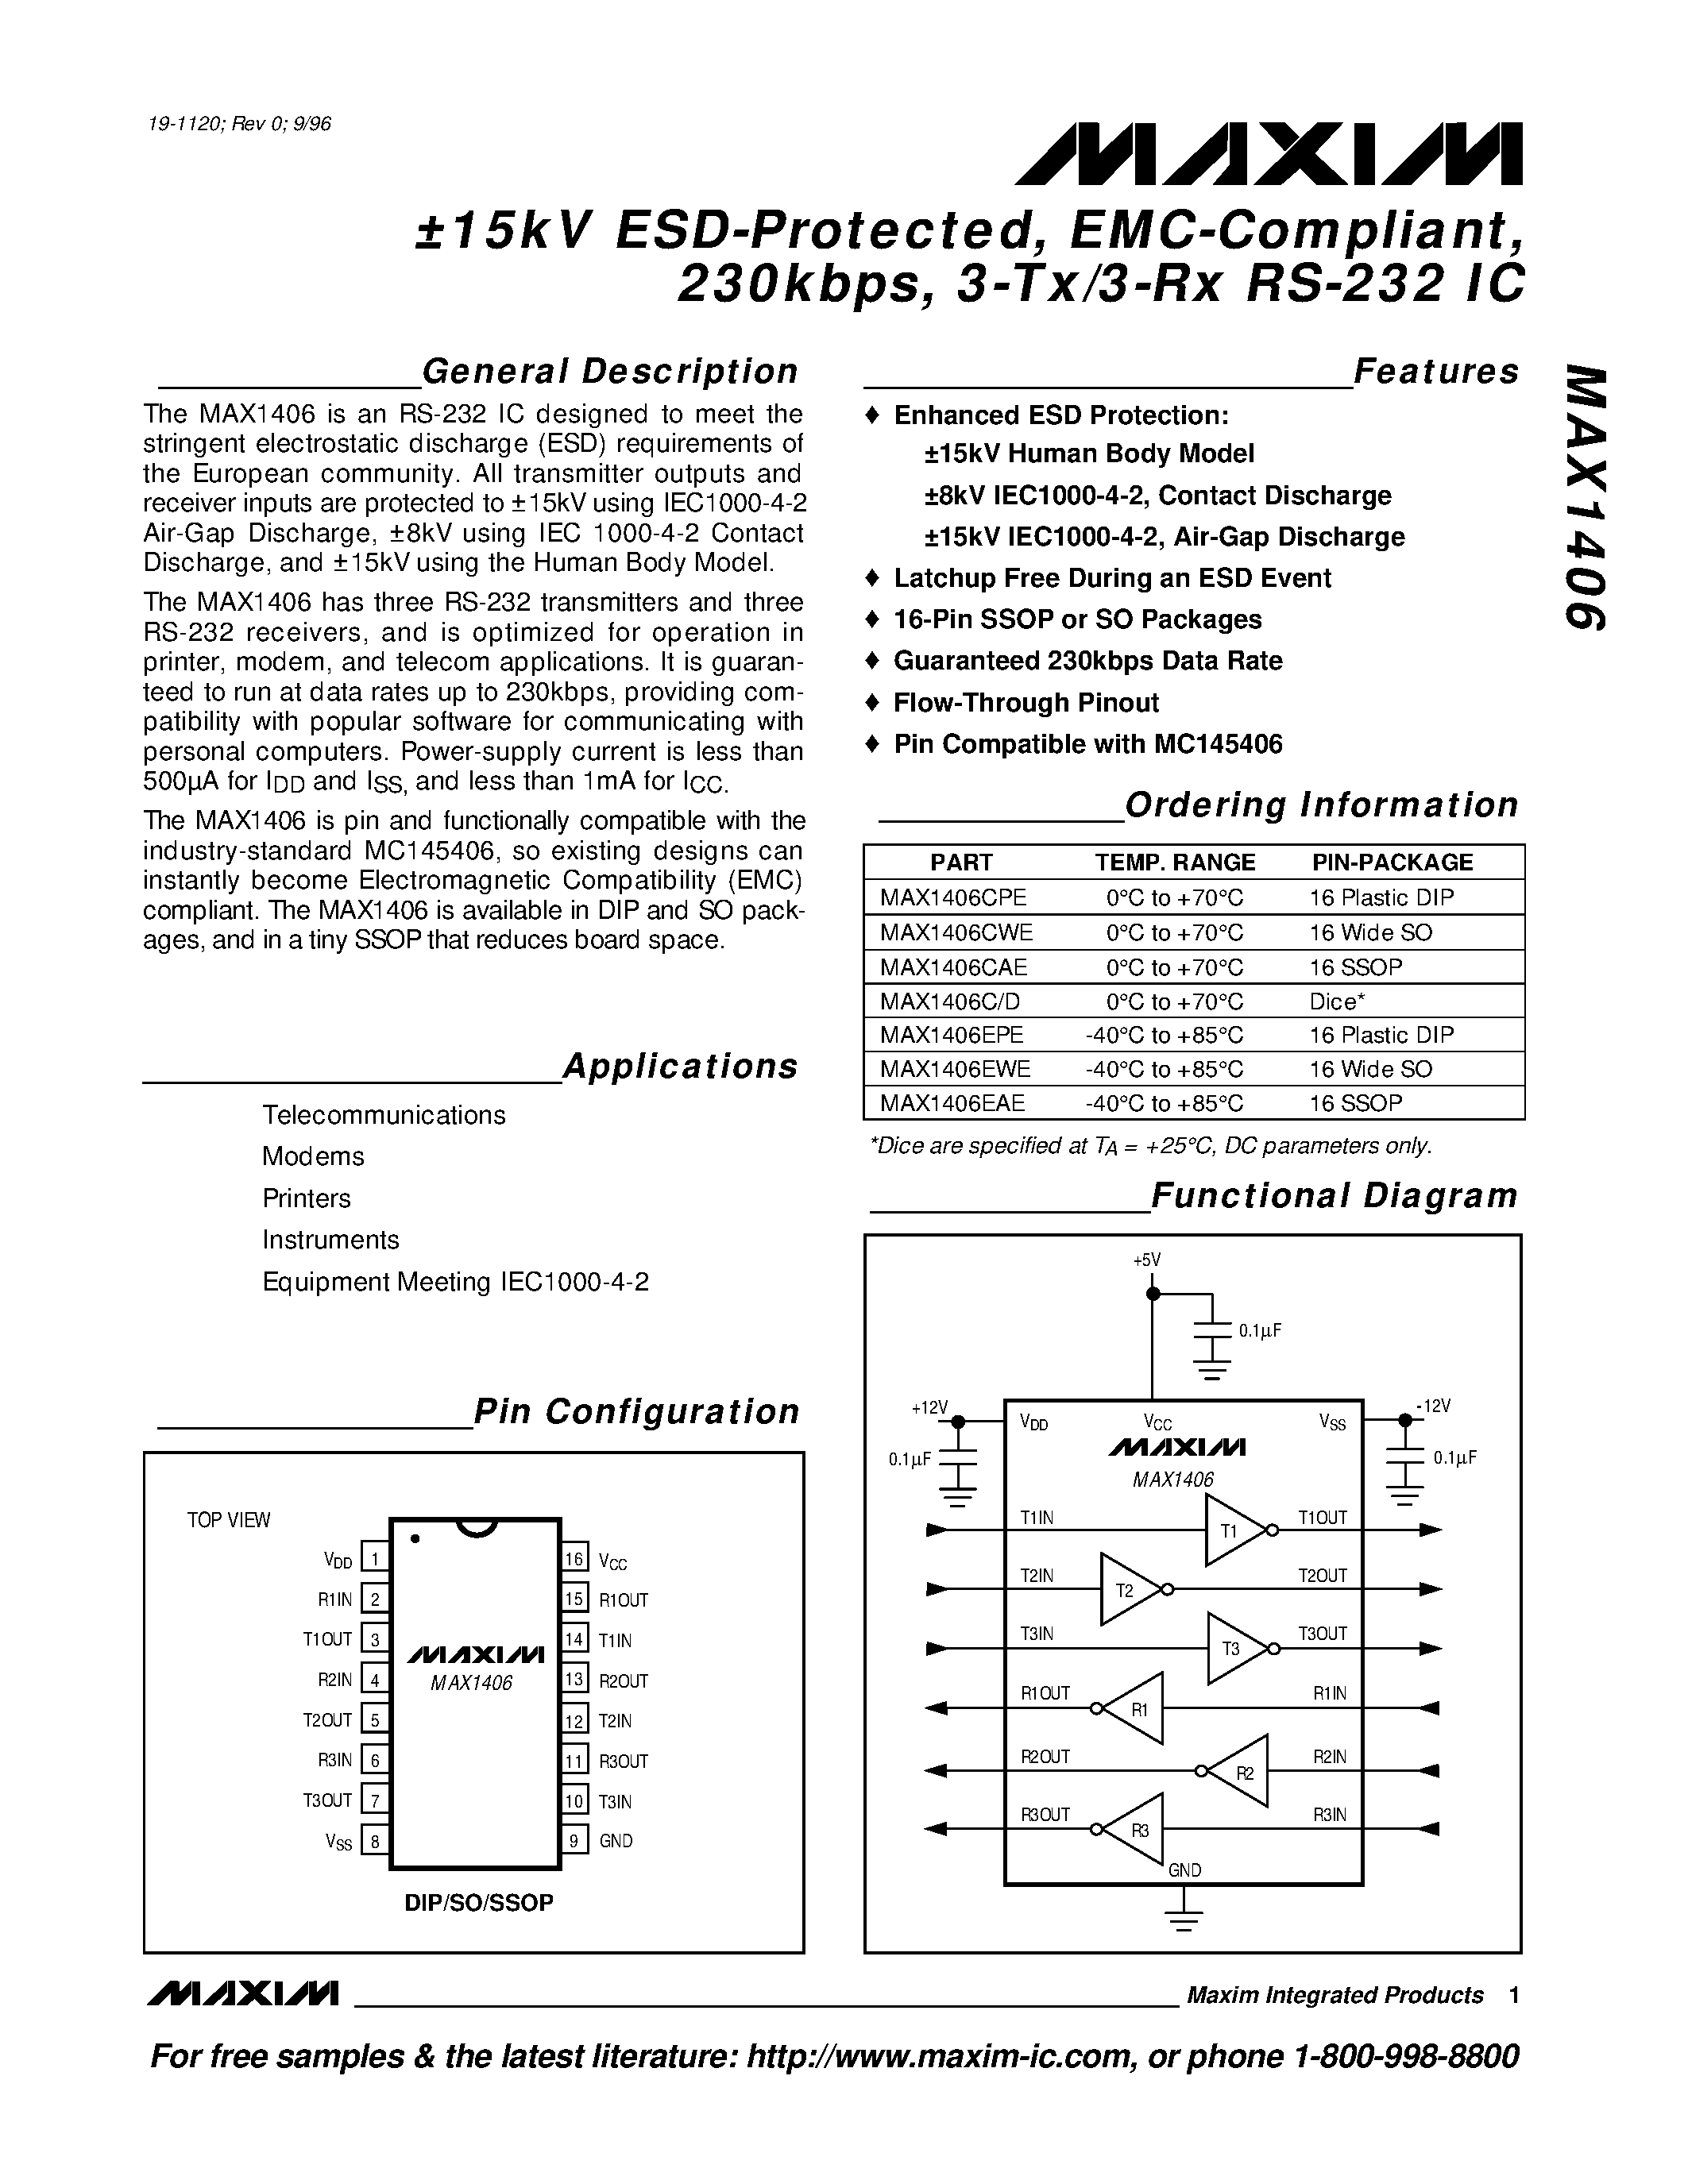 Datasheet MAX1406CAE - 15kV ESD-Protected / EMC-Compliant / 230kbps / 3-Tx/3-Rx RS-232 IC page 1